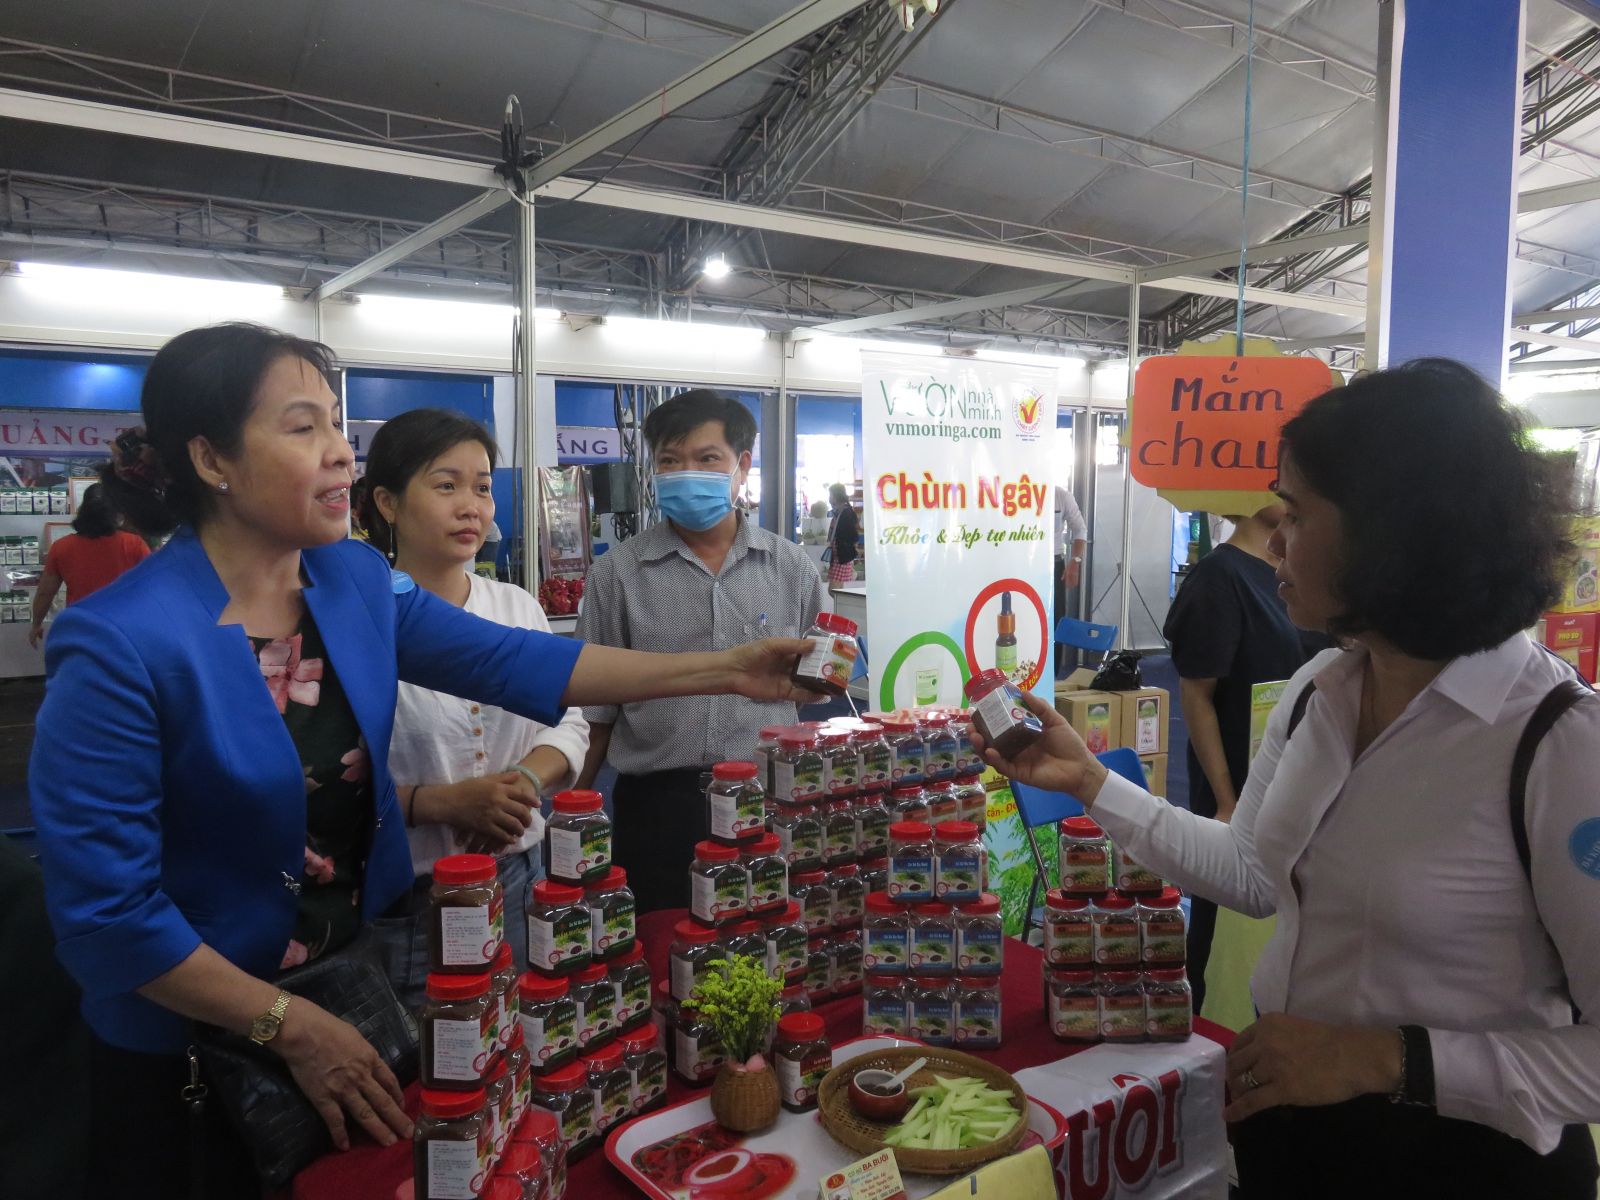 Products are displayed and promoted by the booth of Long An province